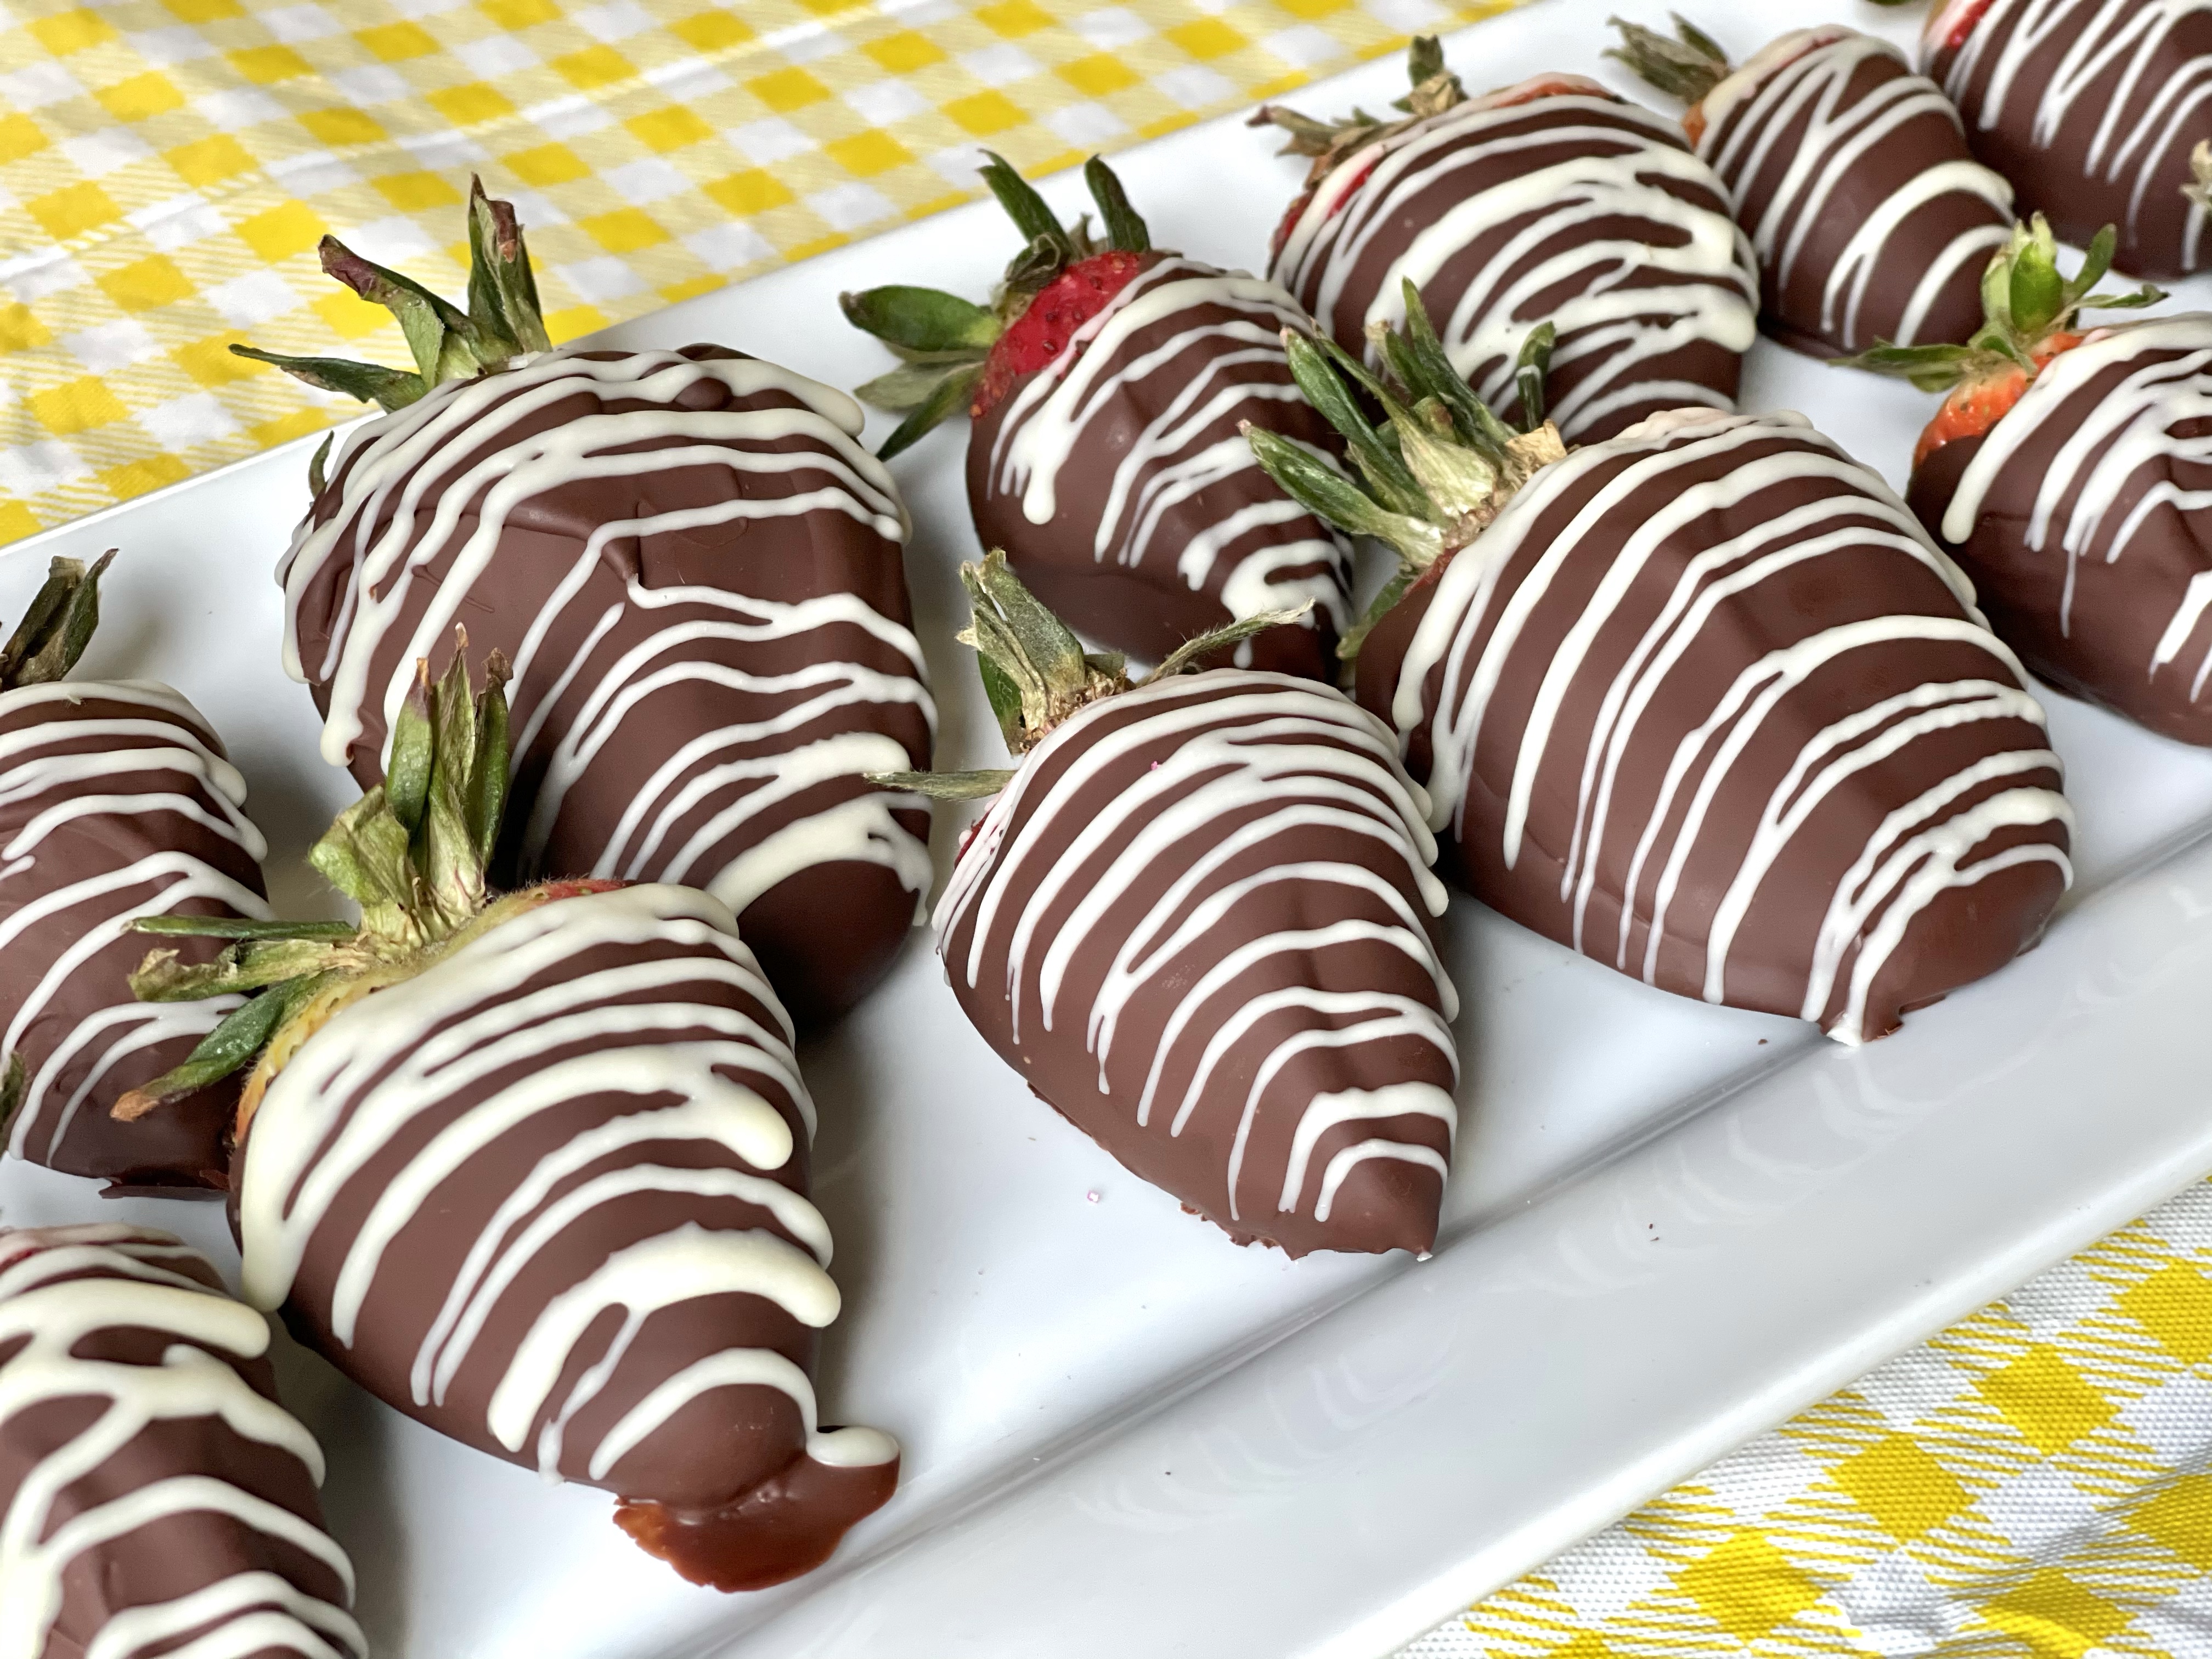 chocolate covered strawberries recipe, how to